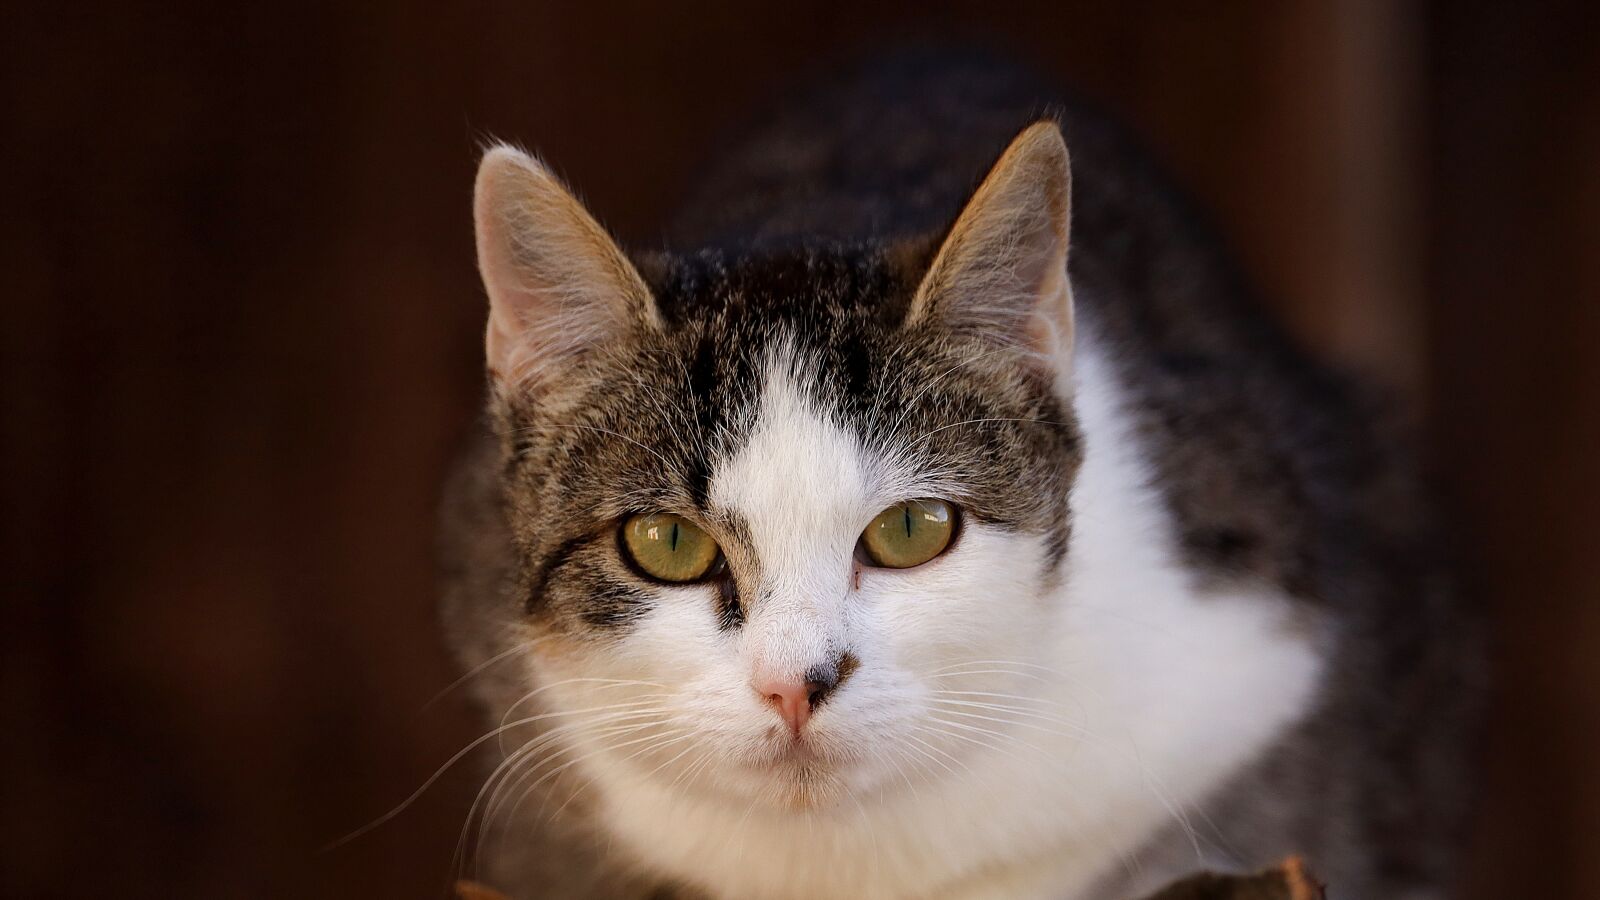 150-600mm F5-6.3 DG OS HSM | Contemporary 015 sample photo. Cat, cat face, cat's photography